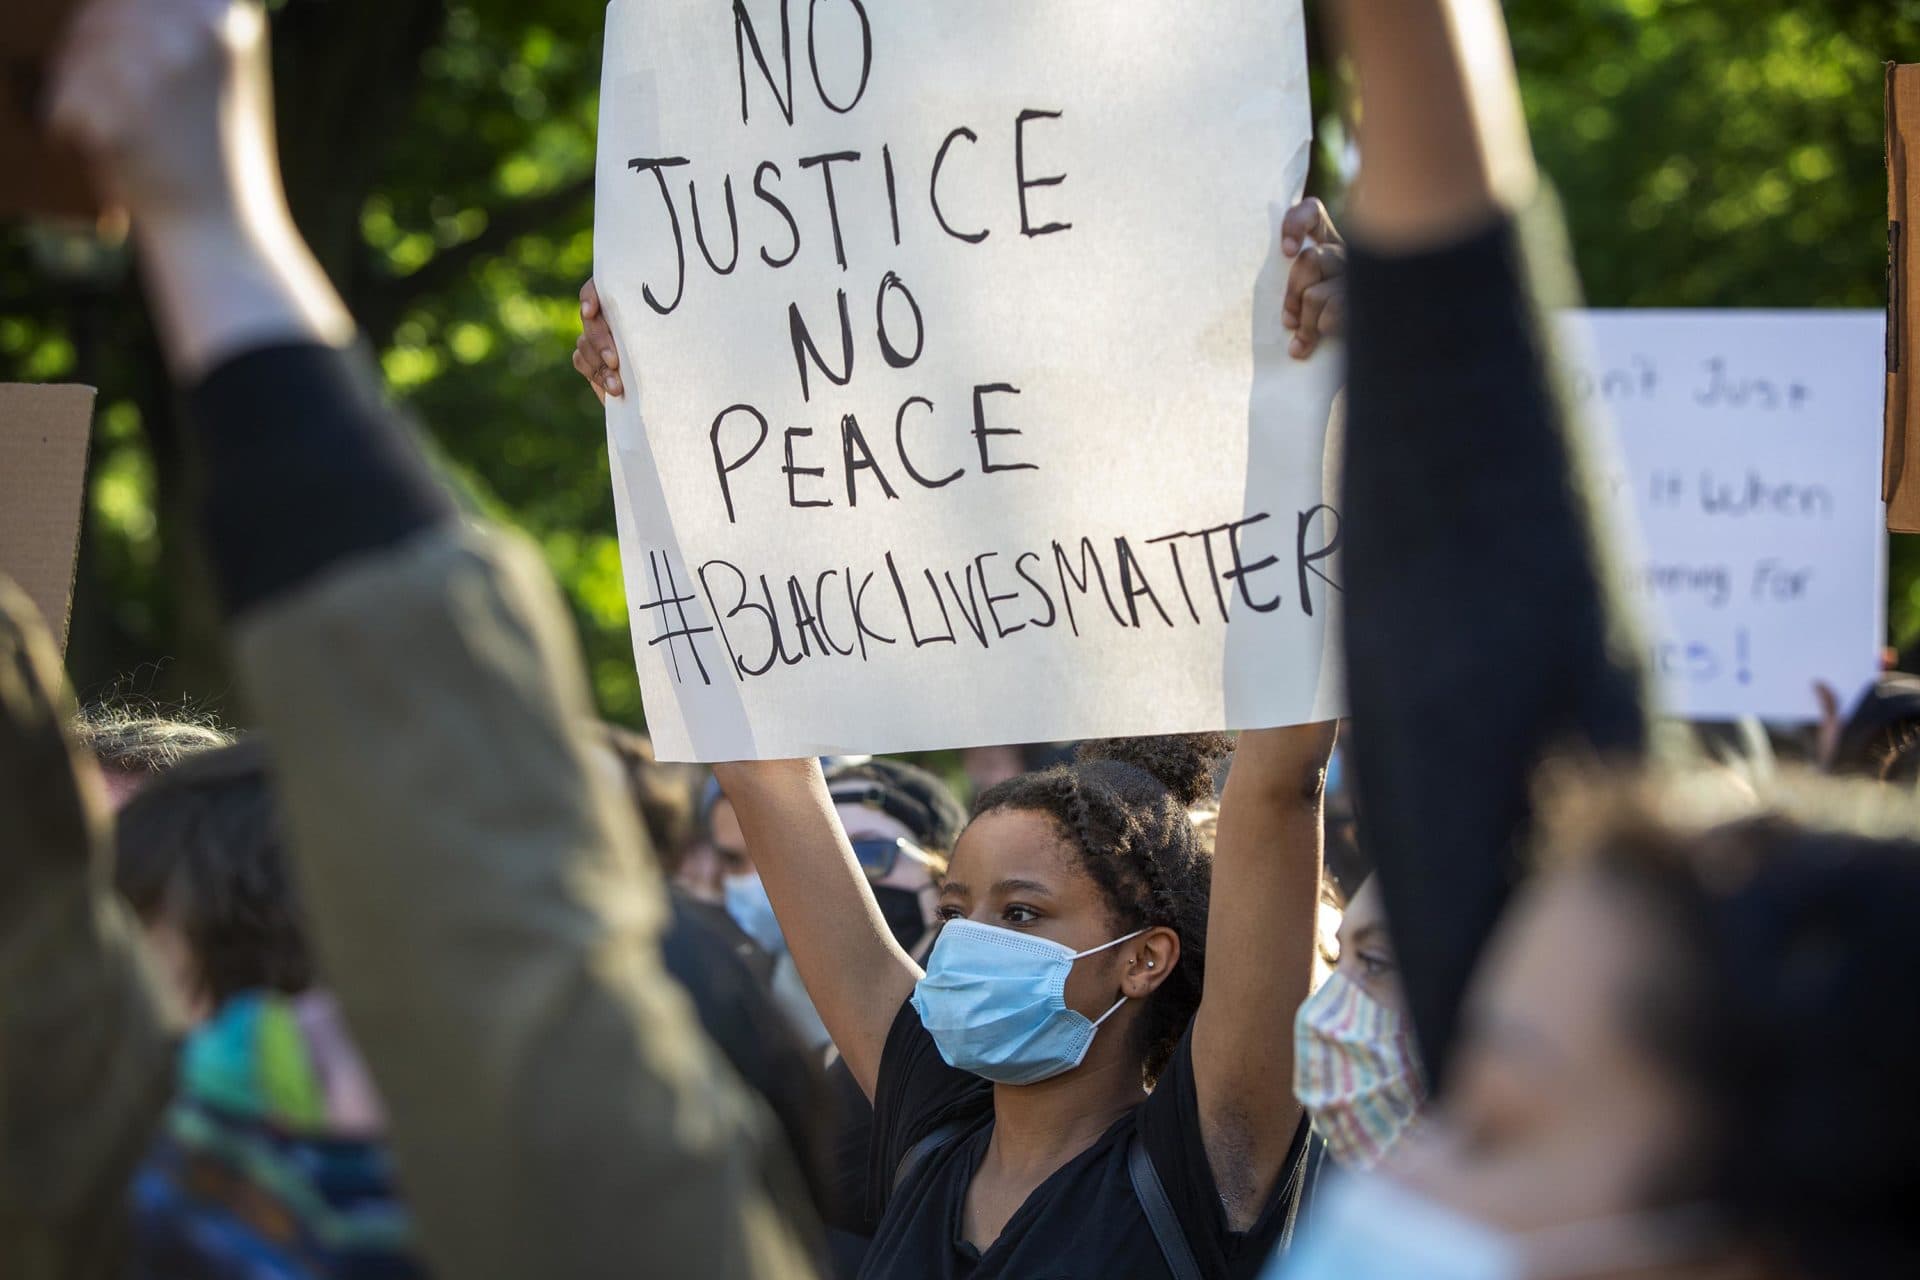 A Black Lives Matter protester hold up a banner on Boston Common. (Robin Lubbock/WBUR)